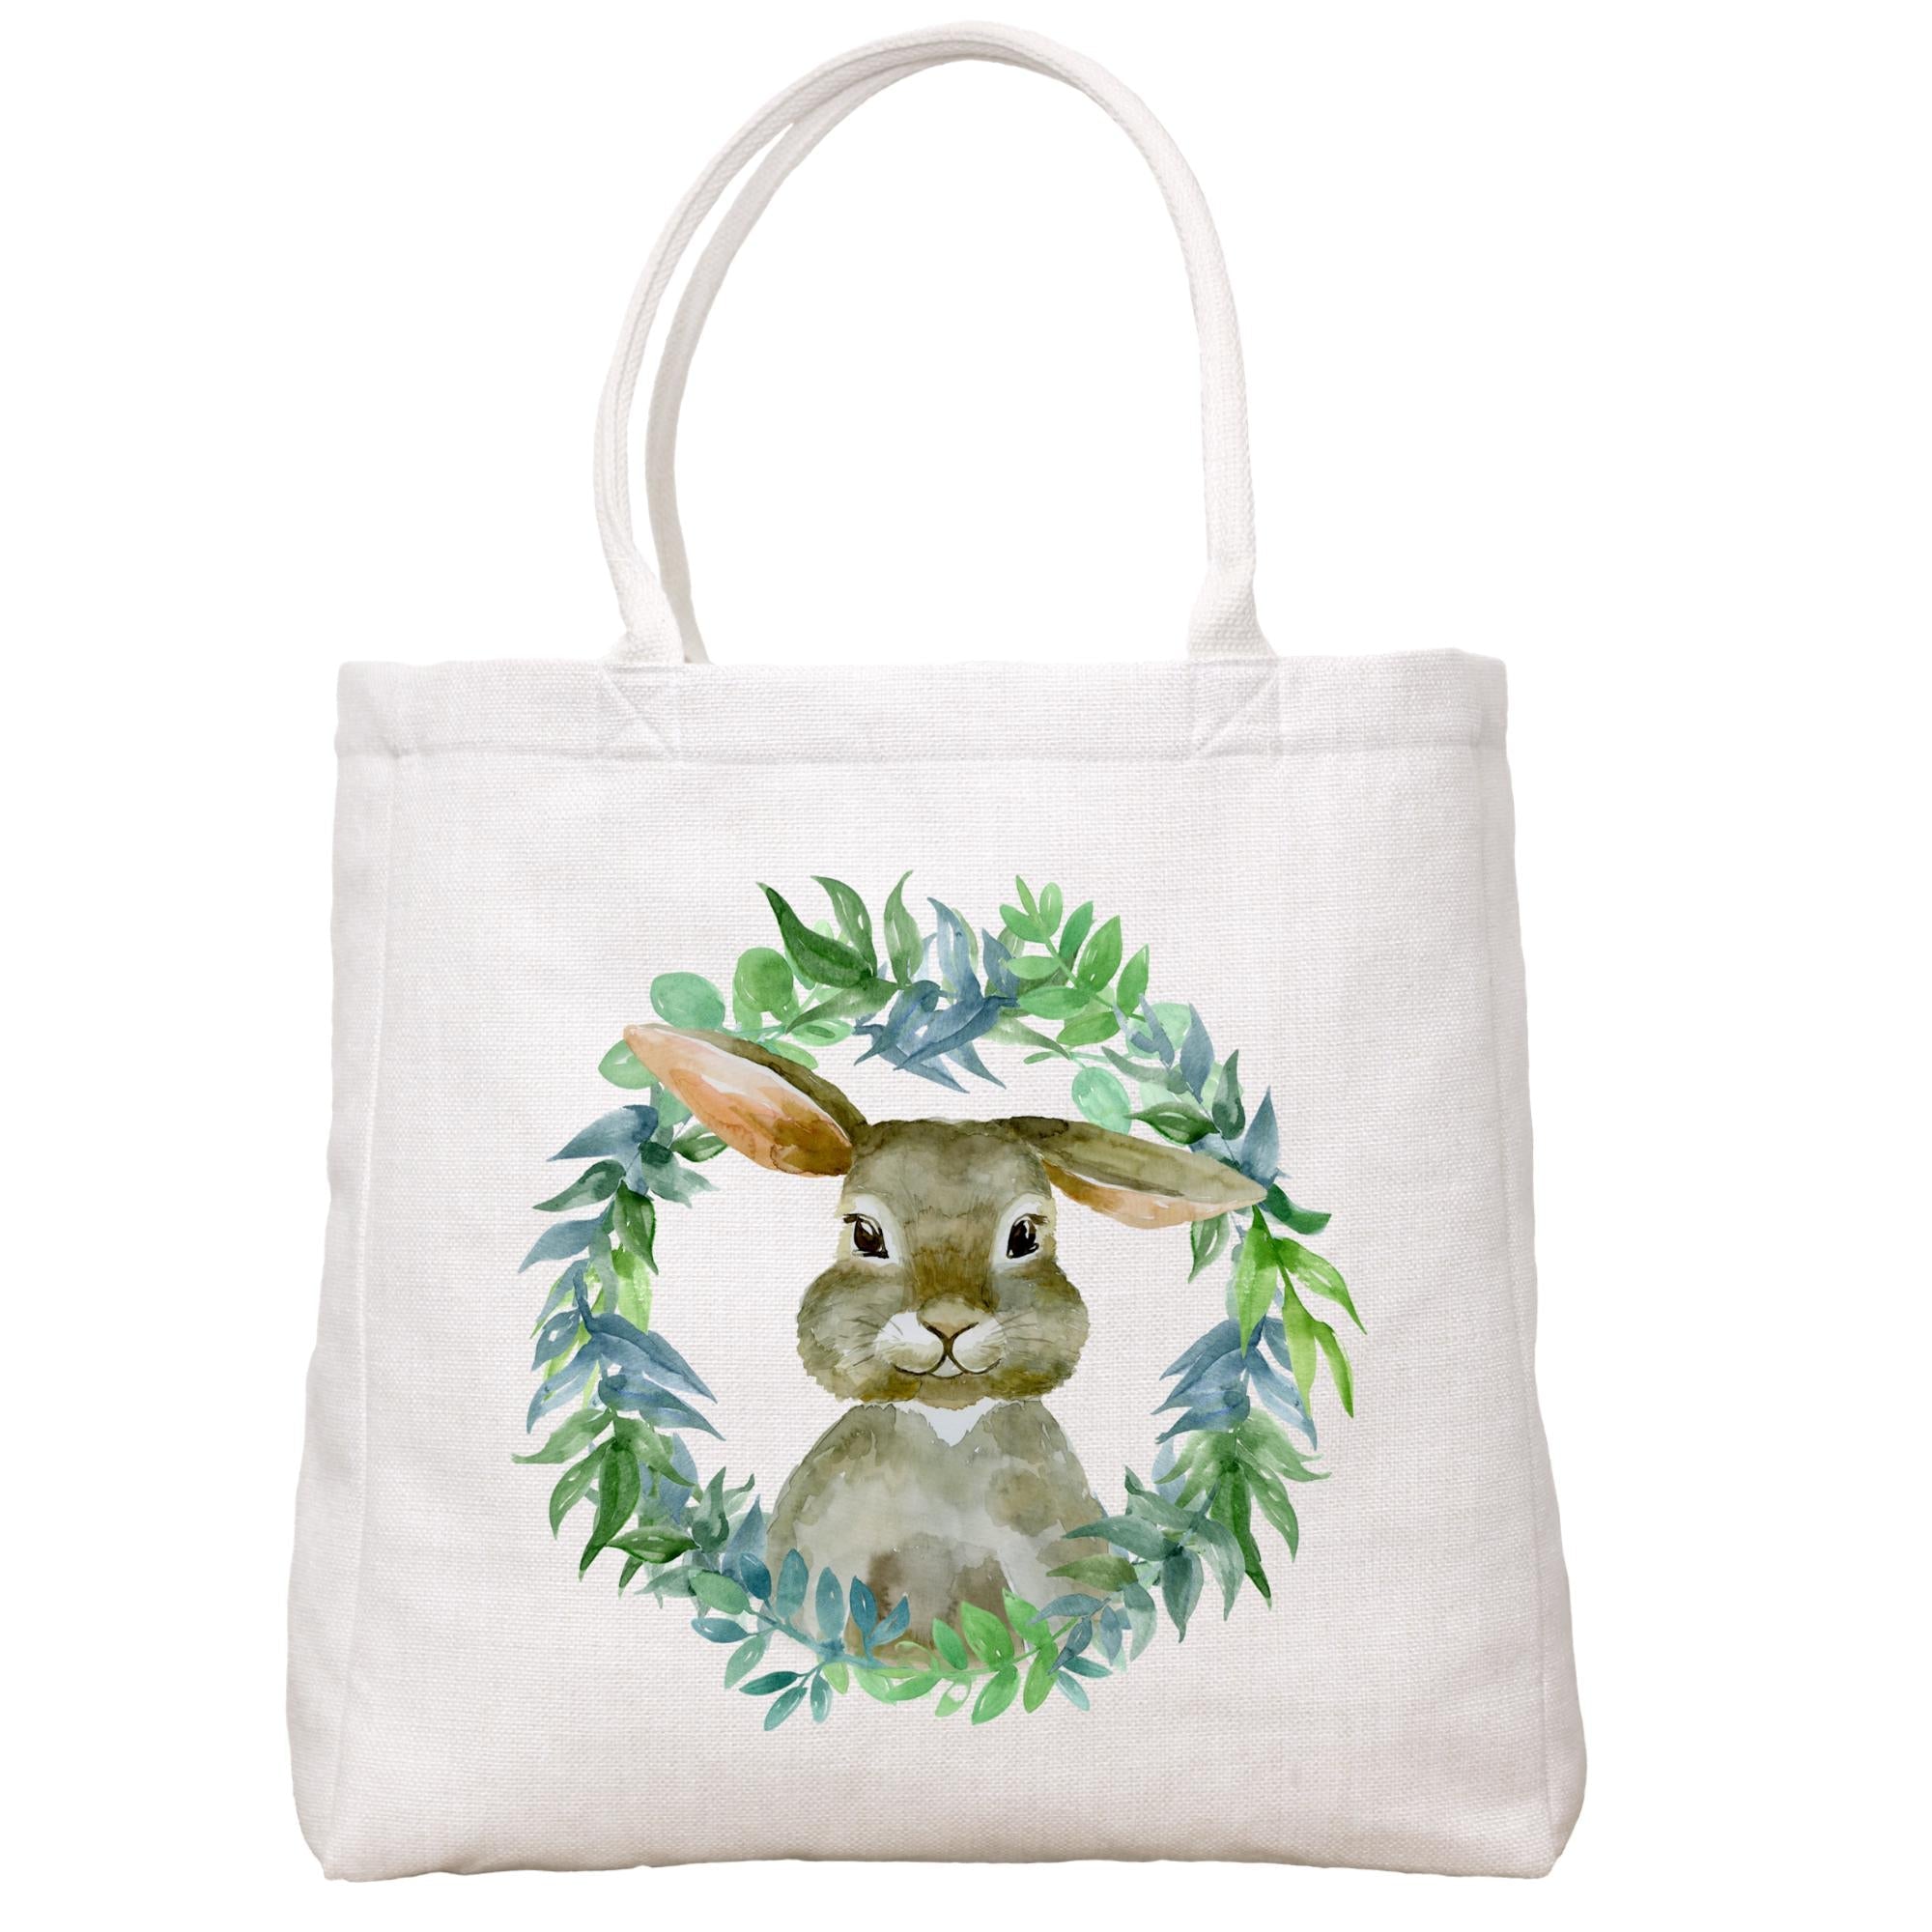 Gray Bunny In Wreath Tote Bag Tote Bag - Southern Sisters